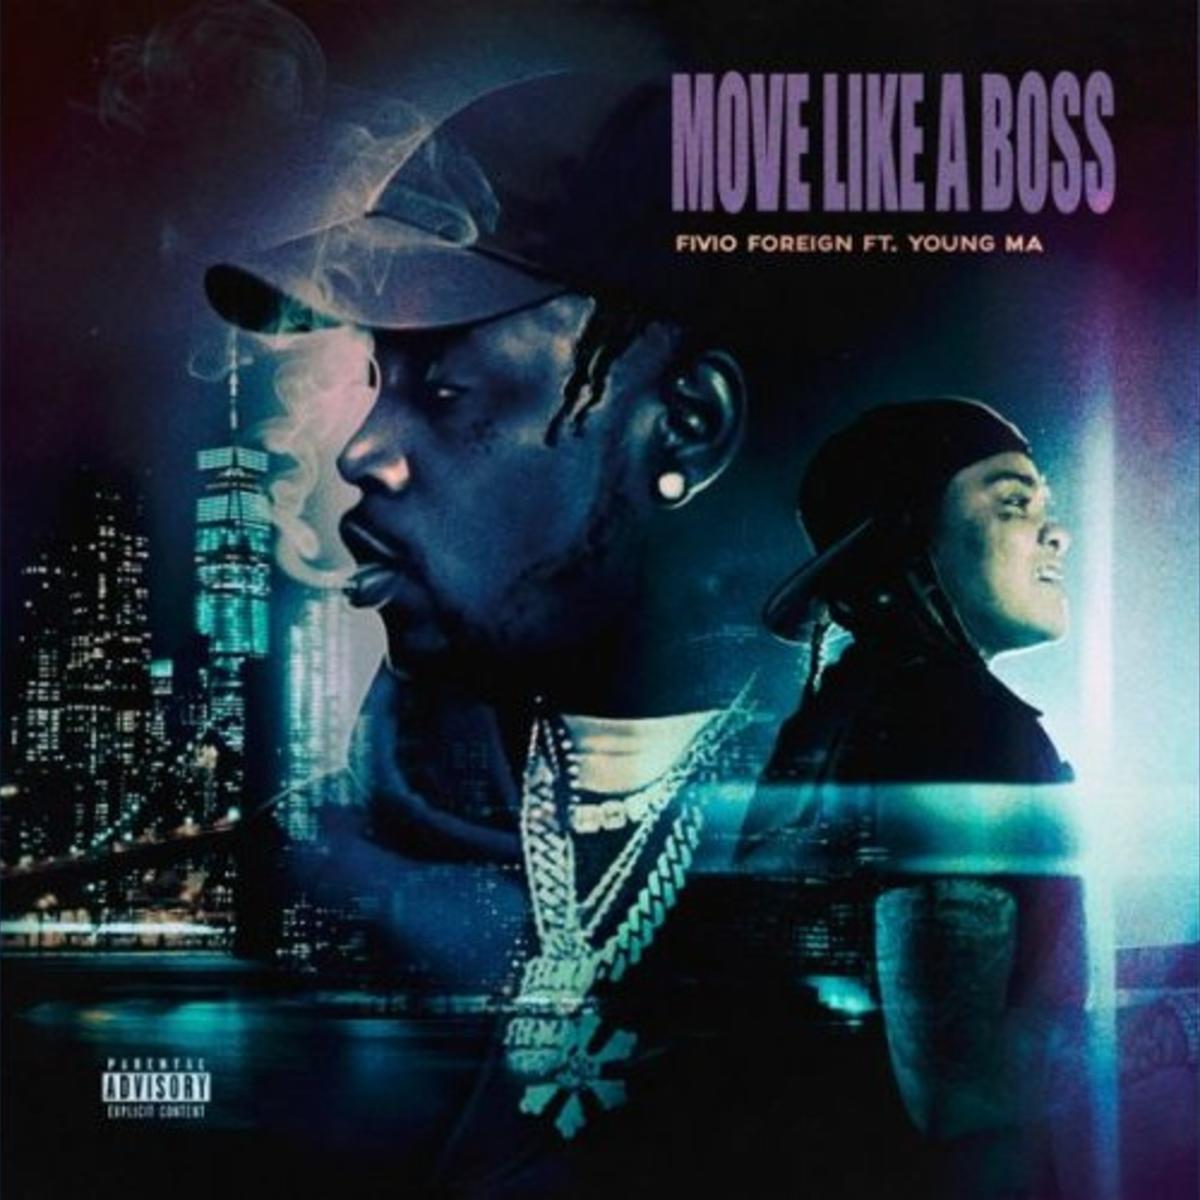 Fivio Foreign & Young M.A. Spit Serious Bars On “Move Like A Boss”